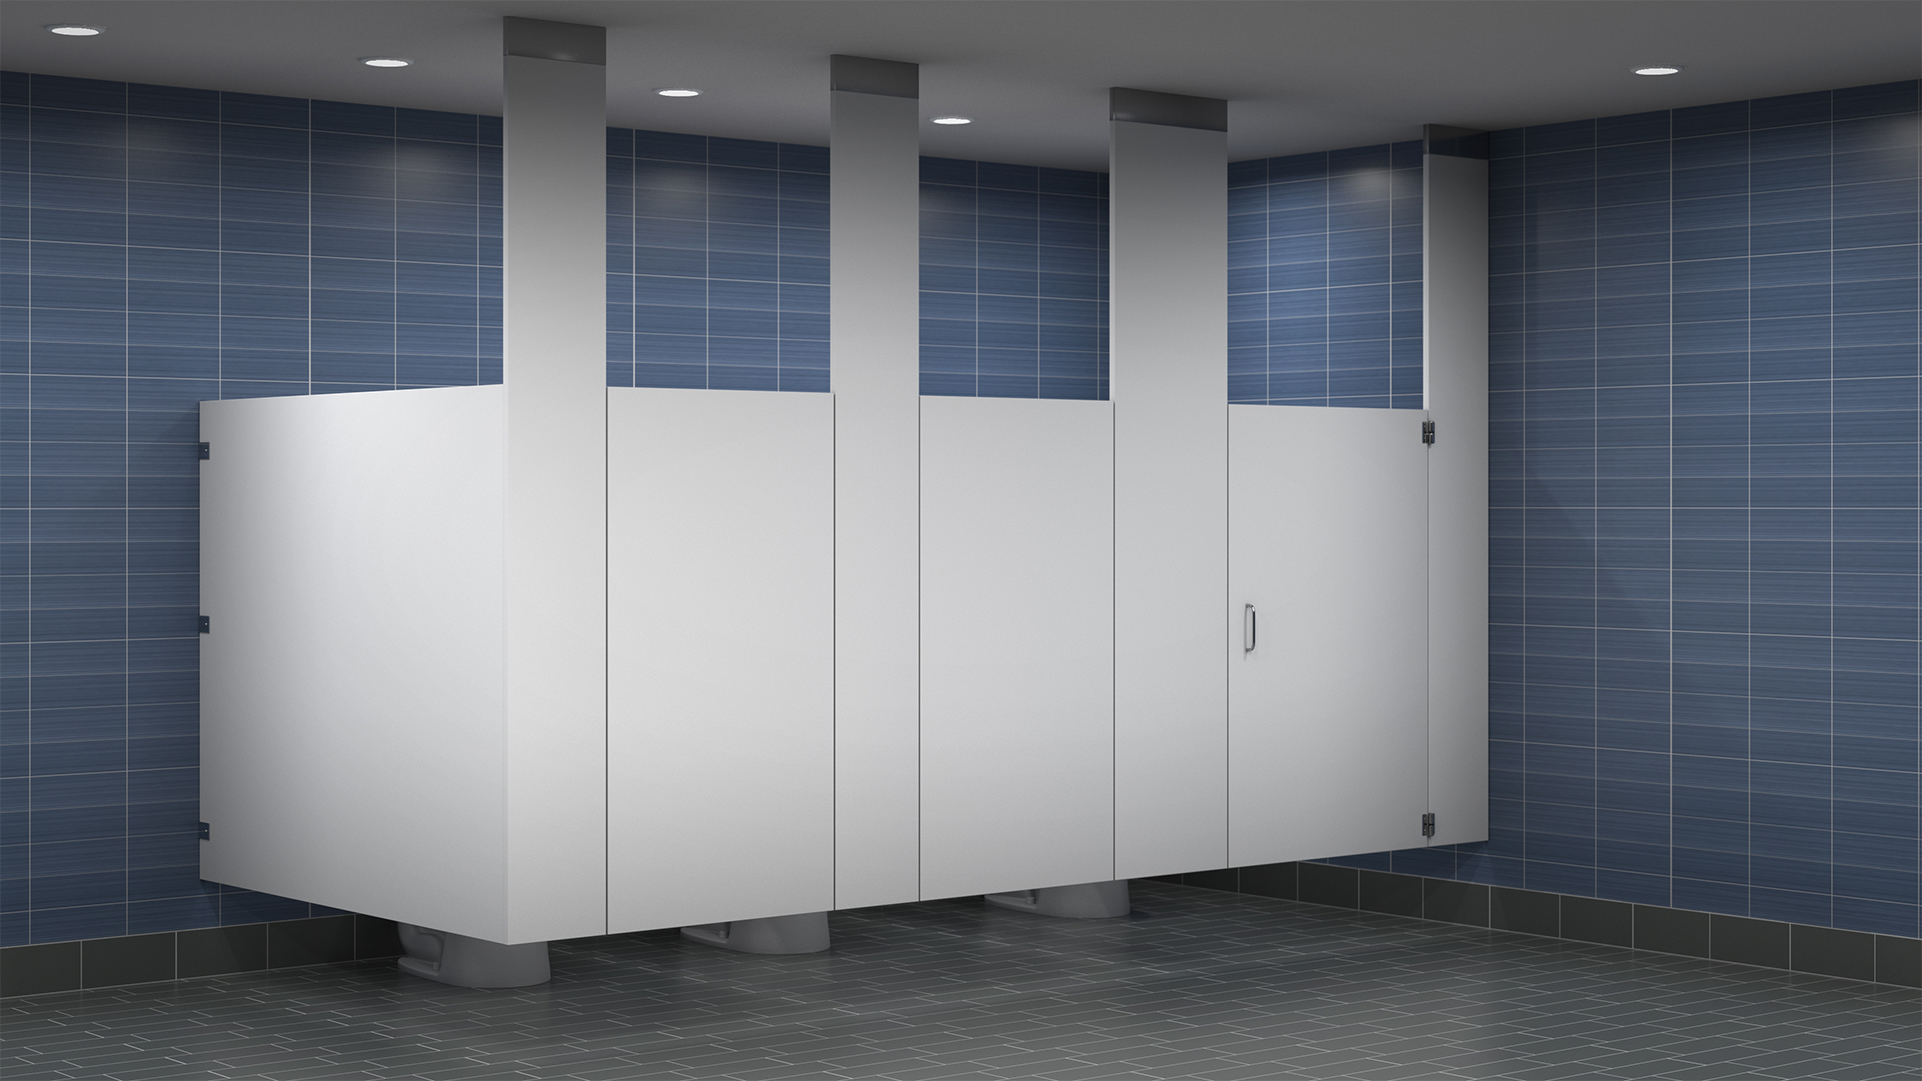 Bobrick SierraSeries Ceiling Hung Toilet Partitions sold by J. Laurenzo Specialties